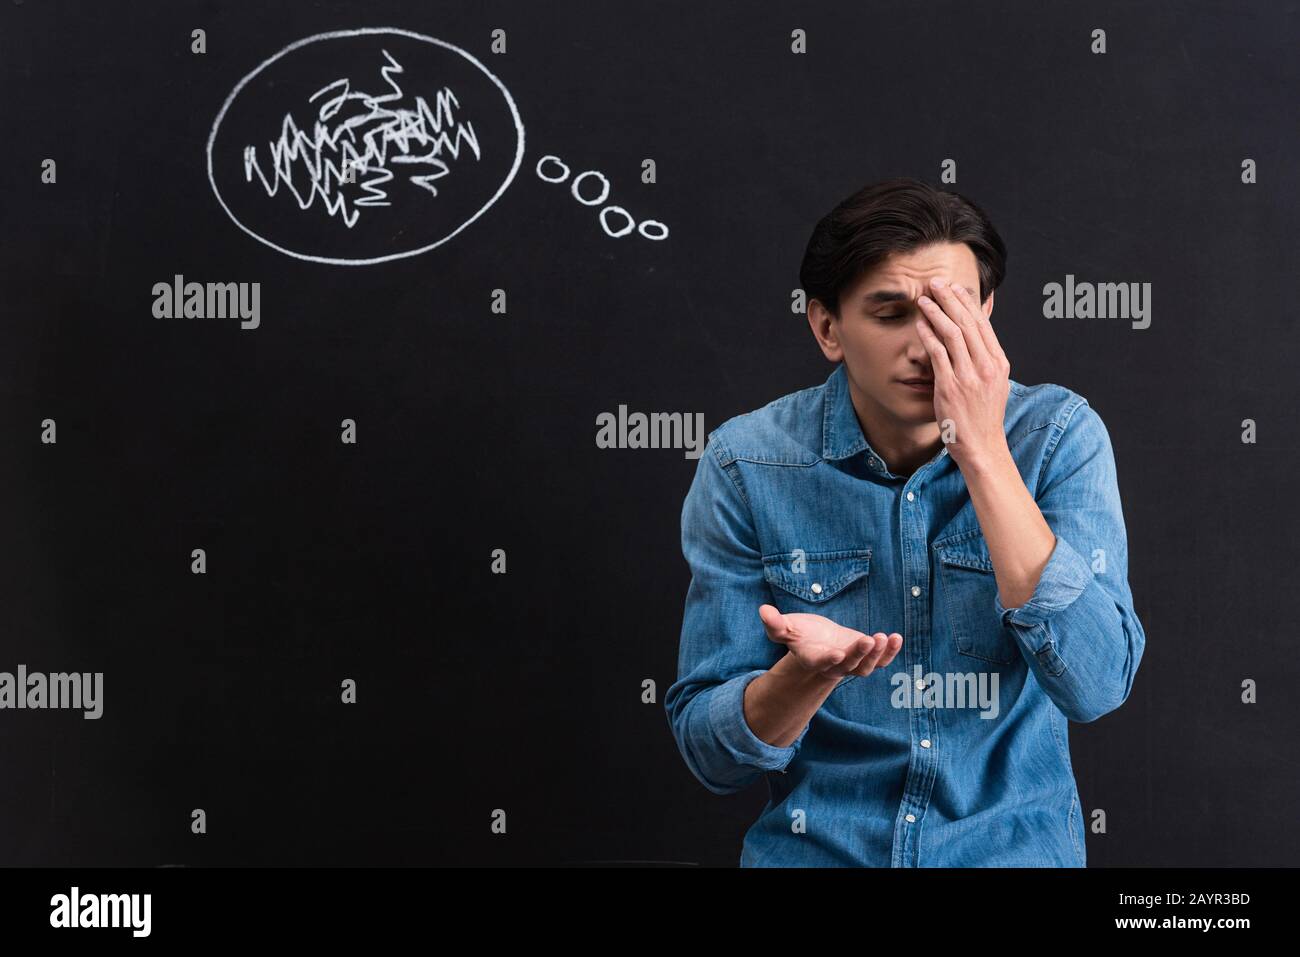 confused young man with thought bubble drawing on blackboard Stock Photo